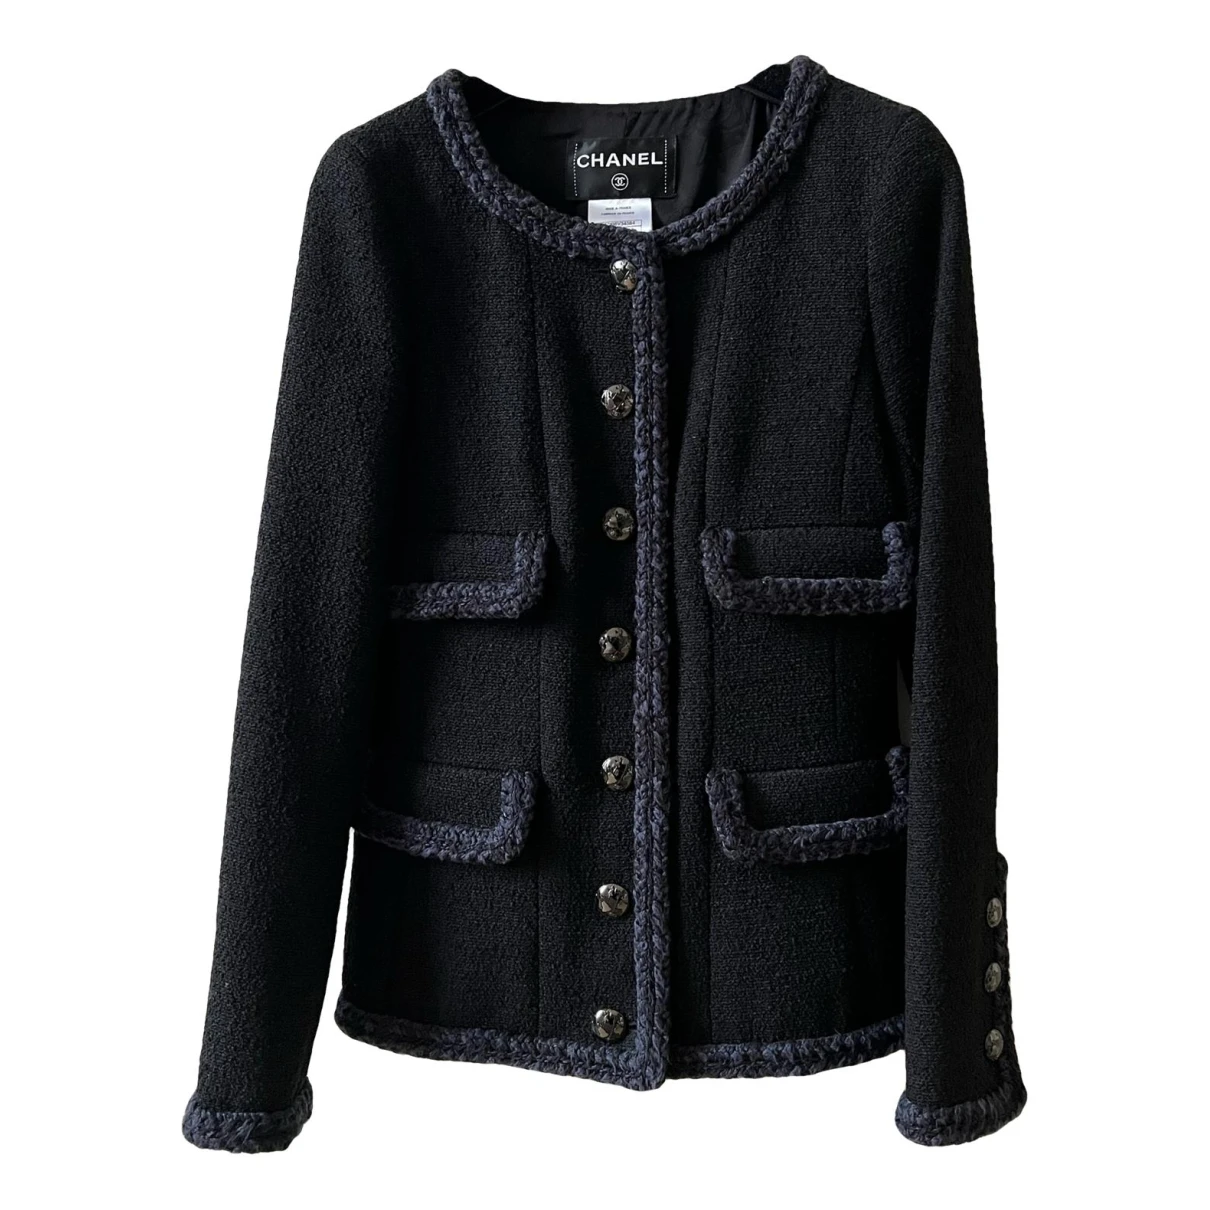 clothing Chanel jackets La Petite Veste Noire for Female Wool 34 FR. Used condition